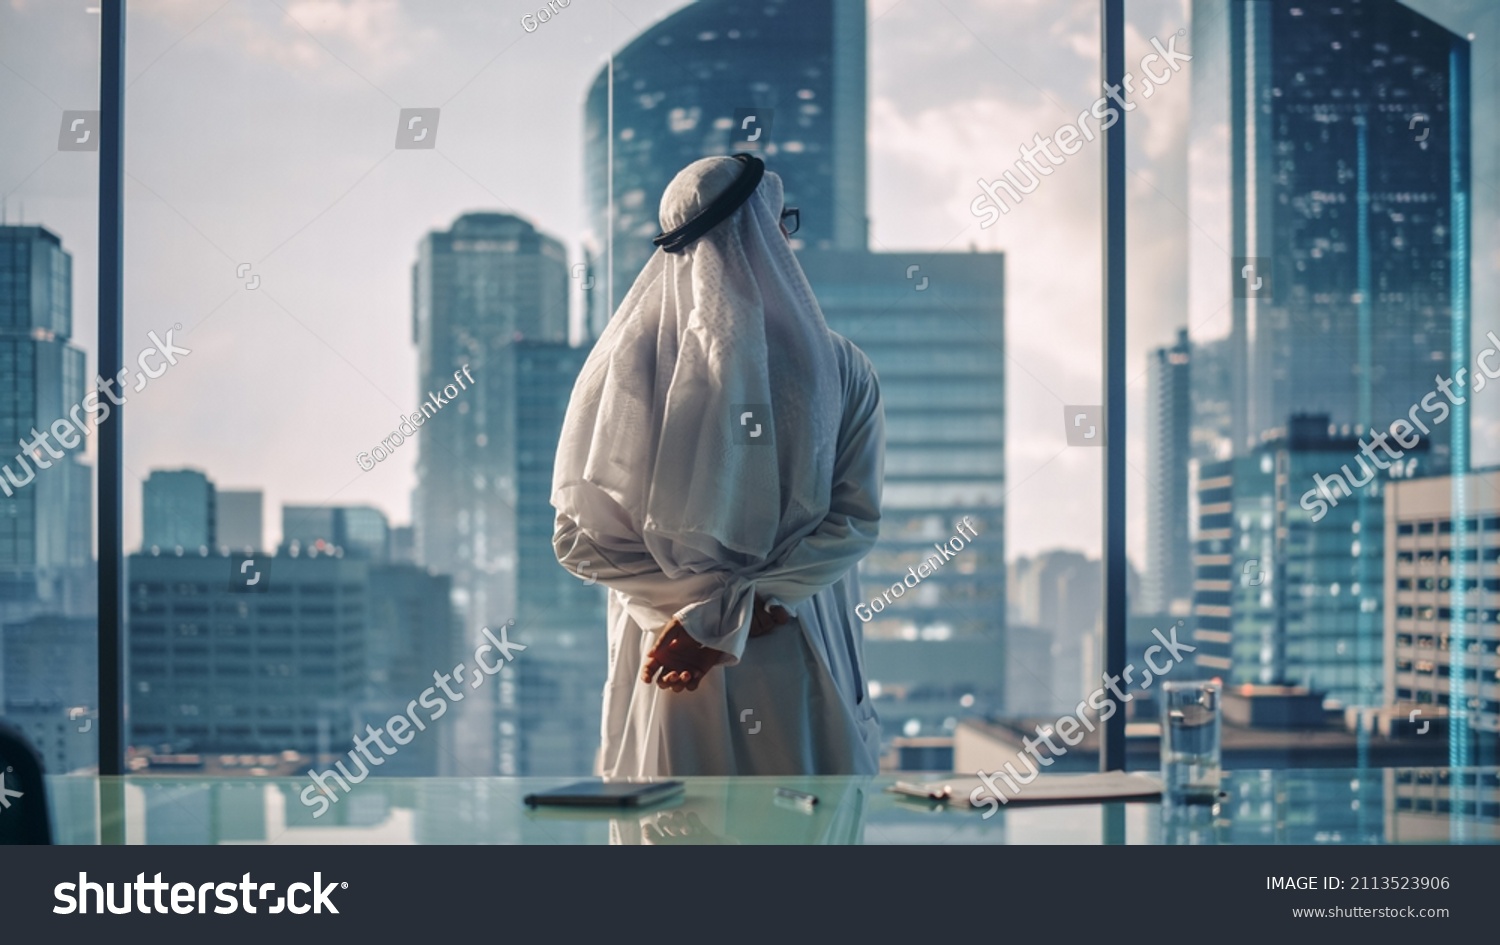 Successful Muslim Businessman in Traditional White Kandura Standing in His Modern Office Looking out of the Window on Big City with Skyscrapers. Successful Saudi, Emirati, Arab Businessman Concept. #2113523906